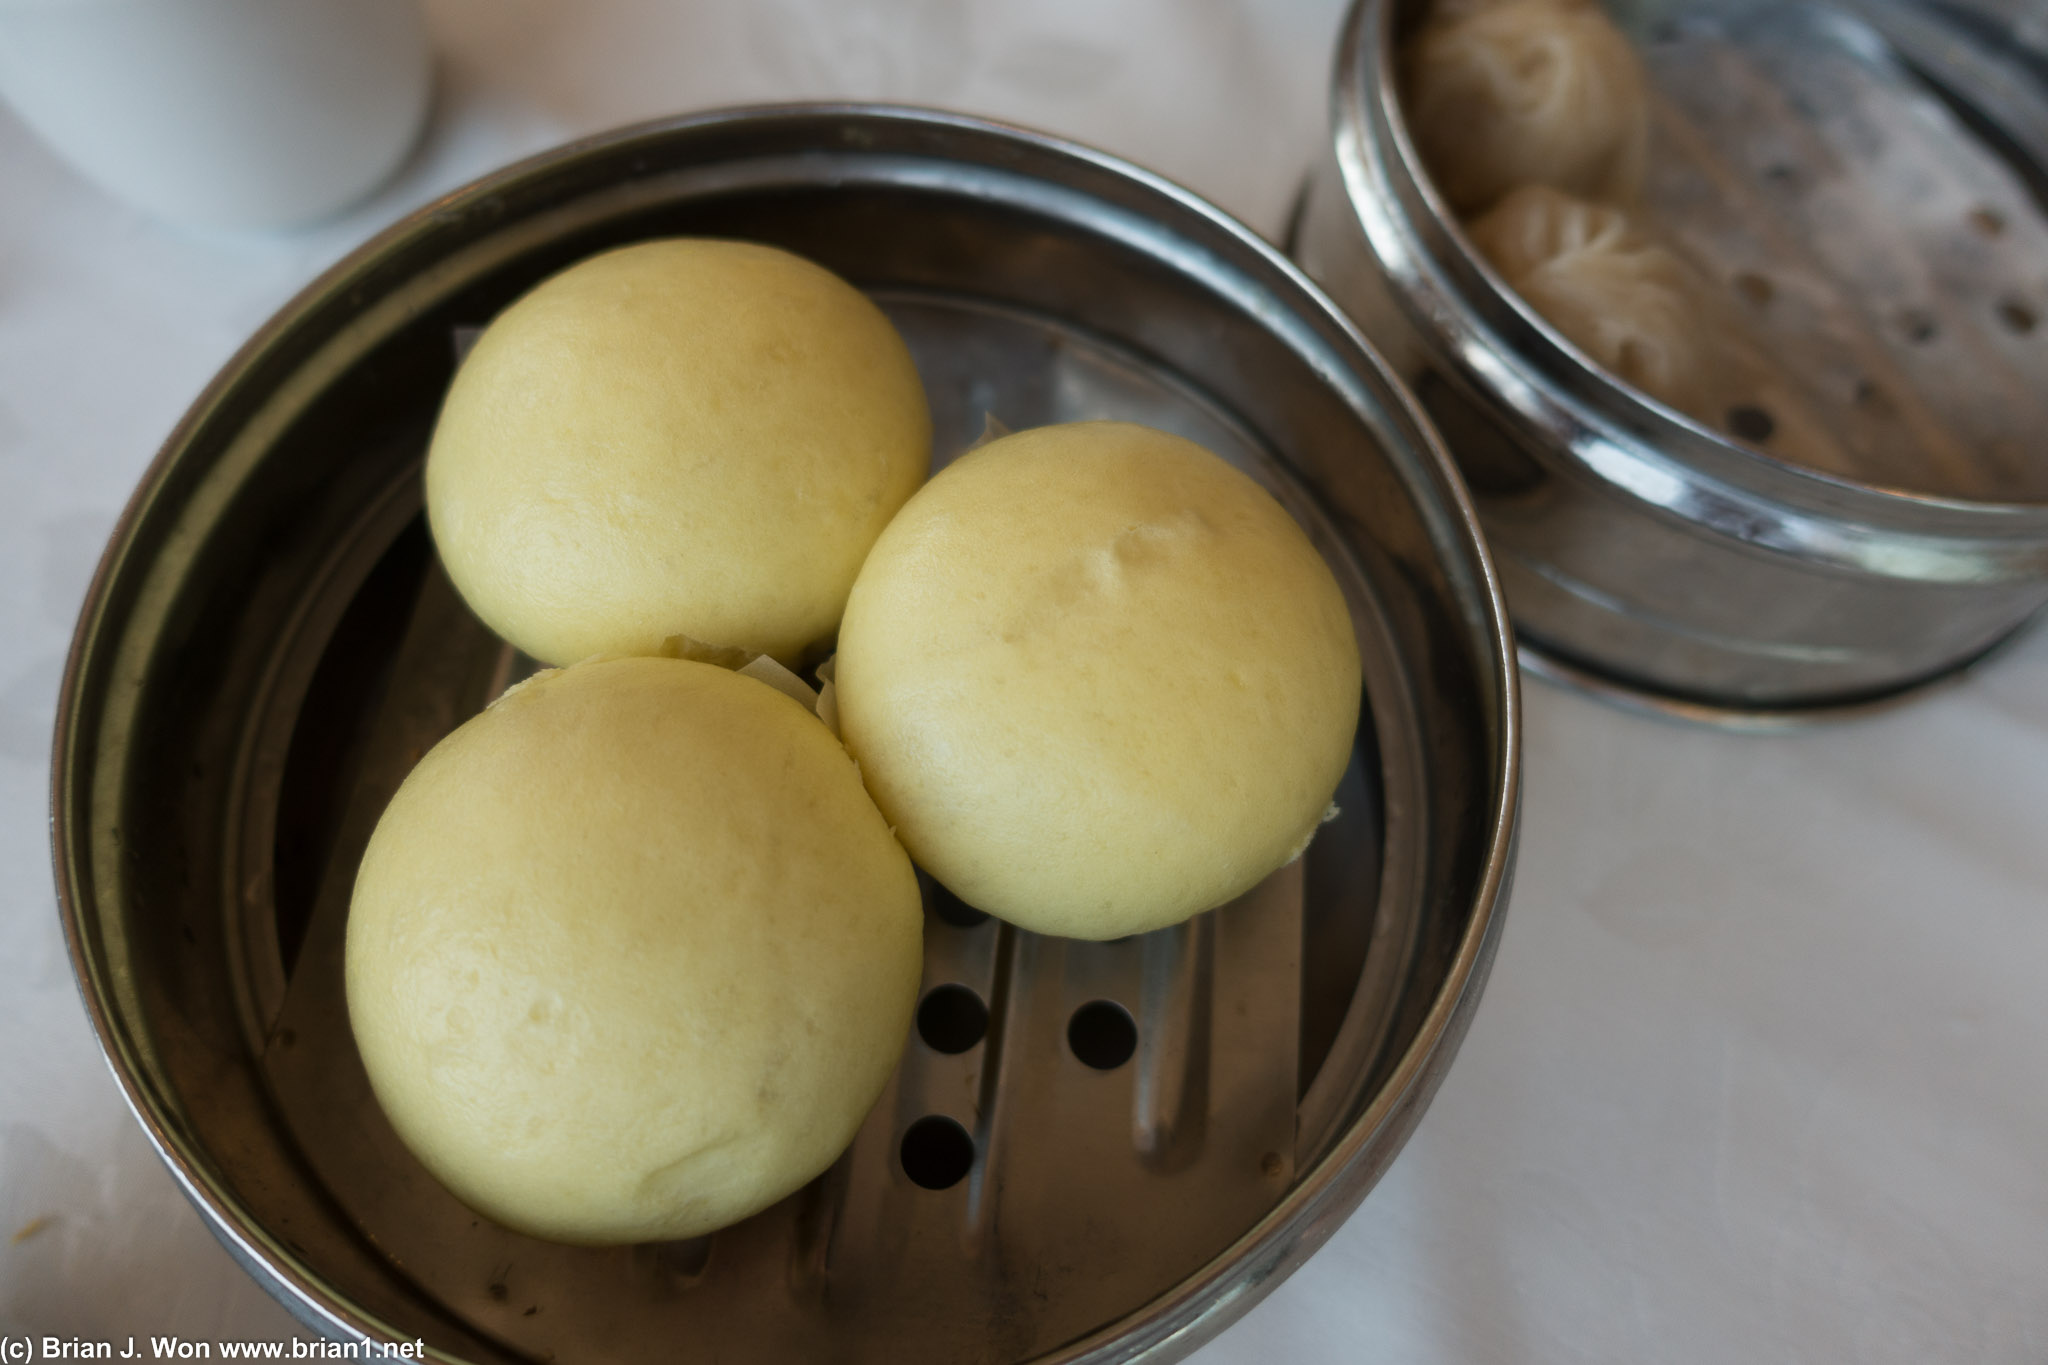 Egg custard buns. Not sure why these are greenish.